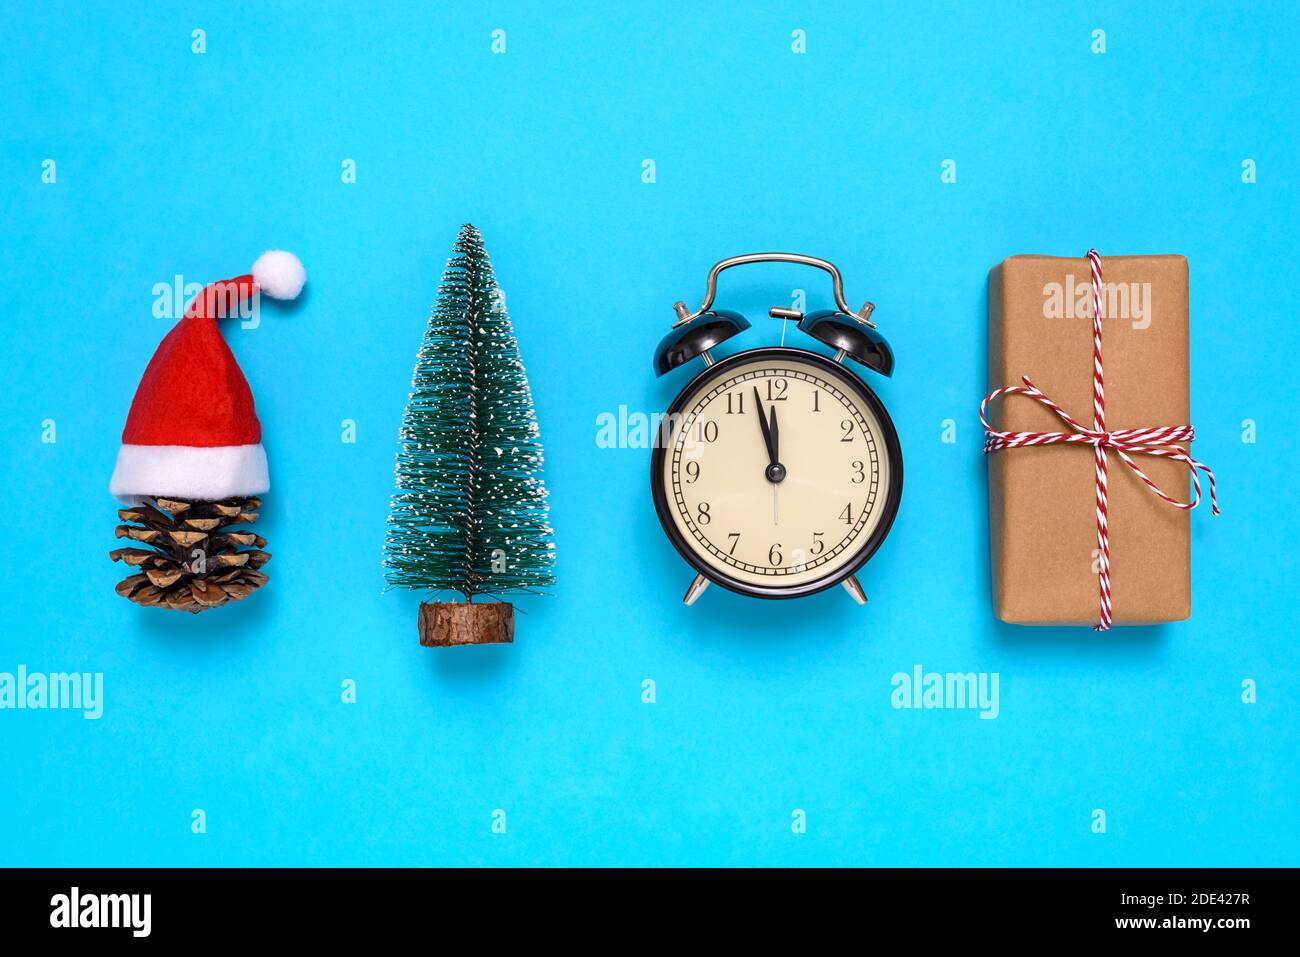 Pine cone with Santa Claus hat, small Christmas tree, alarm clock and gift box on blue background. The concept of celebrating the New Year and Christm Stock Photo